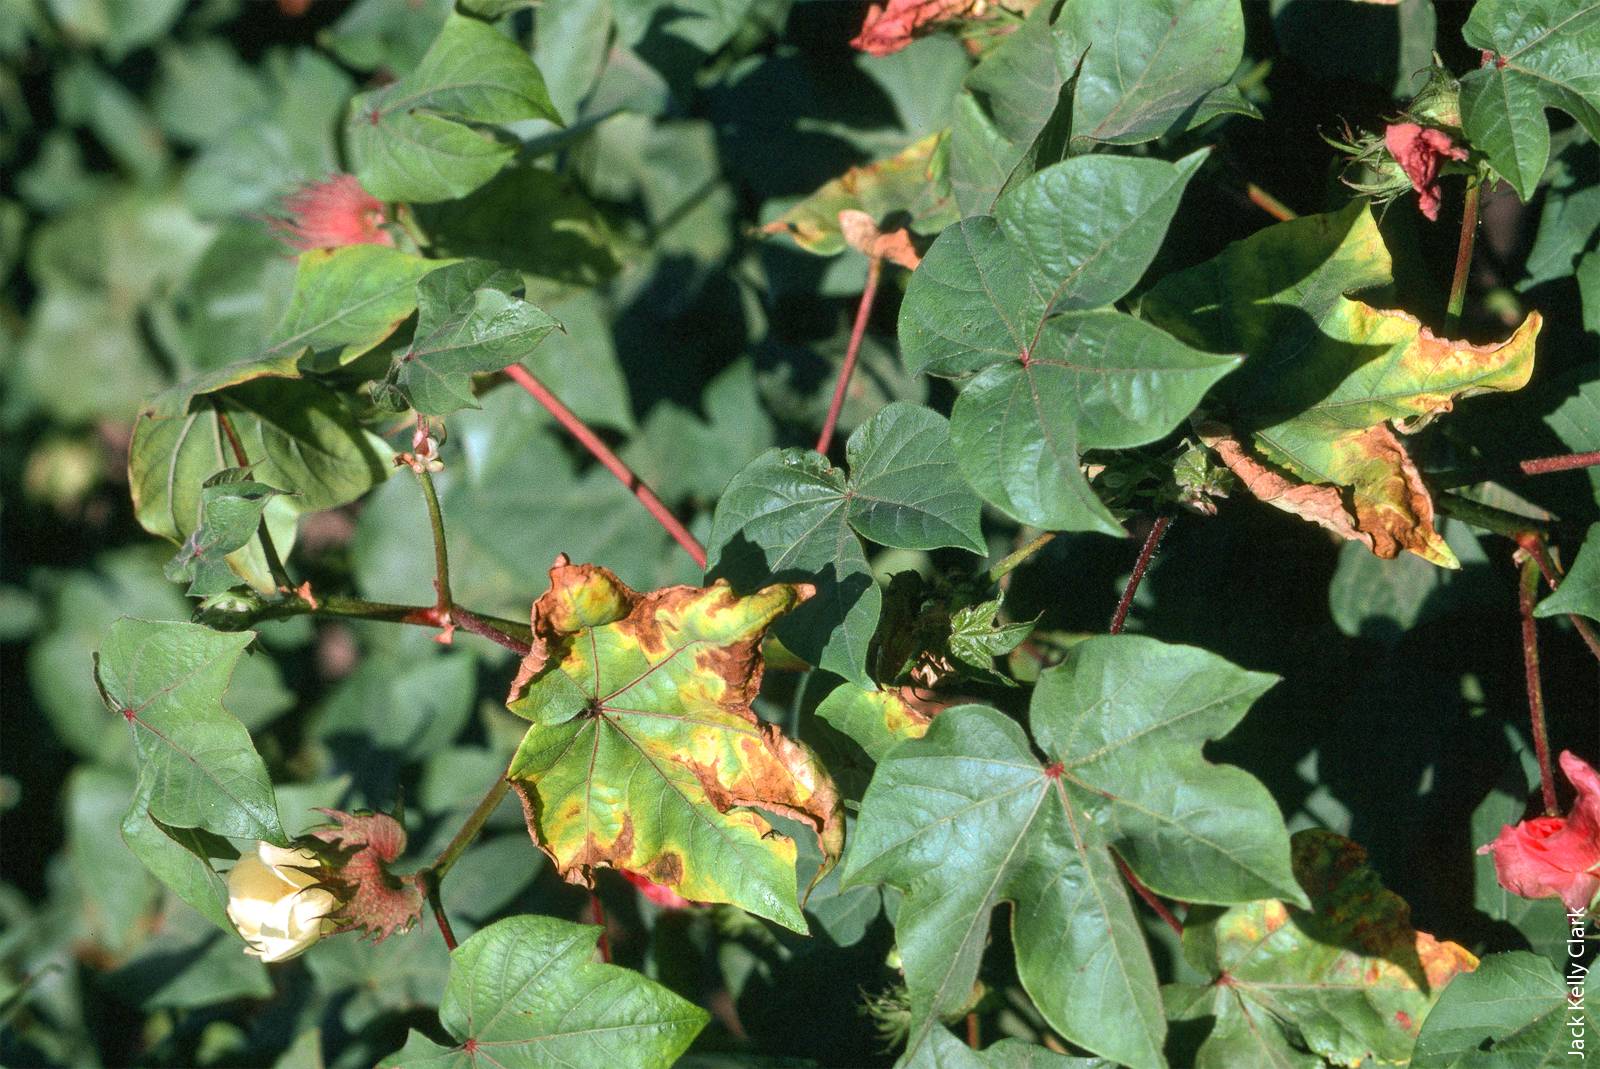 Soil testing can be used to assess nutrient availability and determine fertilization rates. The foliage damage in this cotton plant was caused by a potassium deficiency.